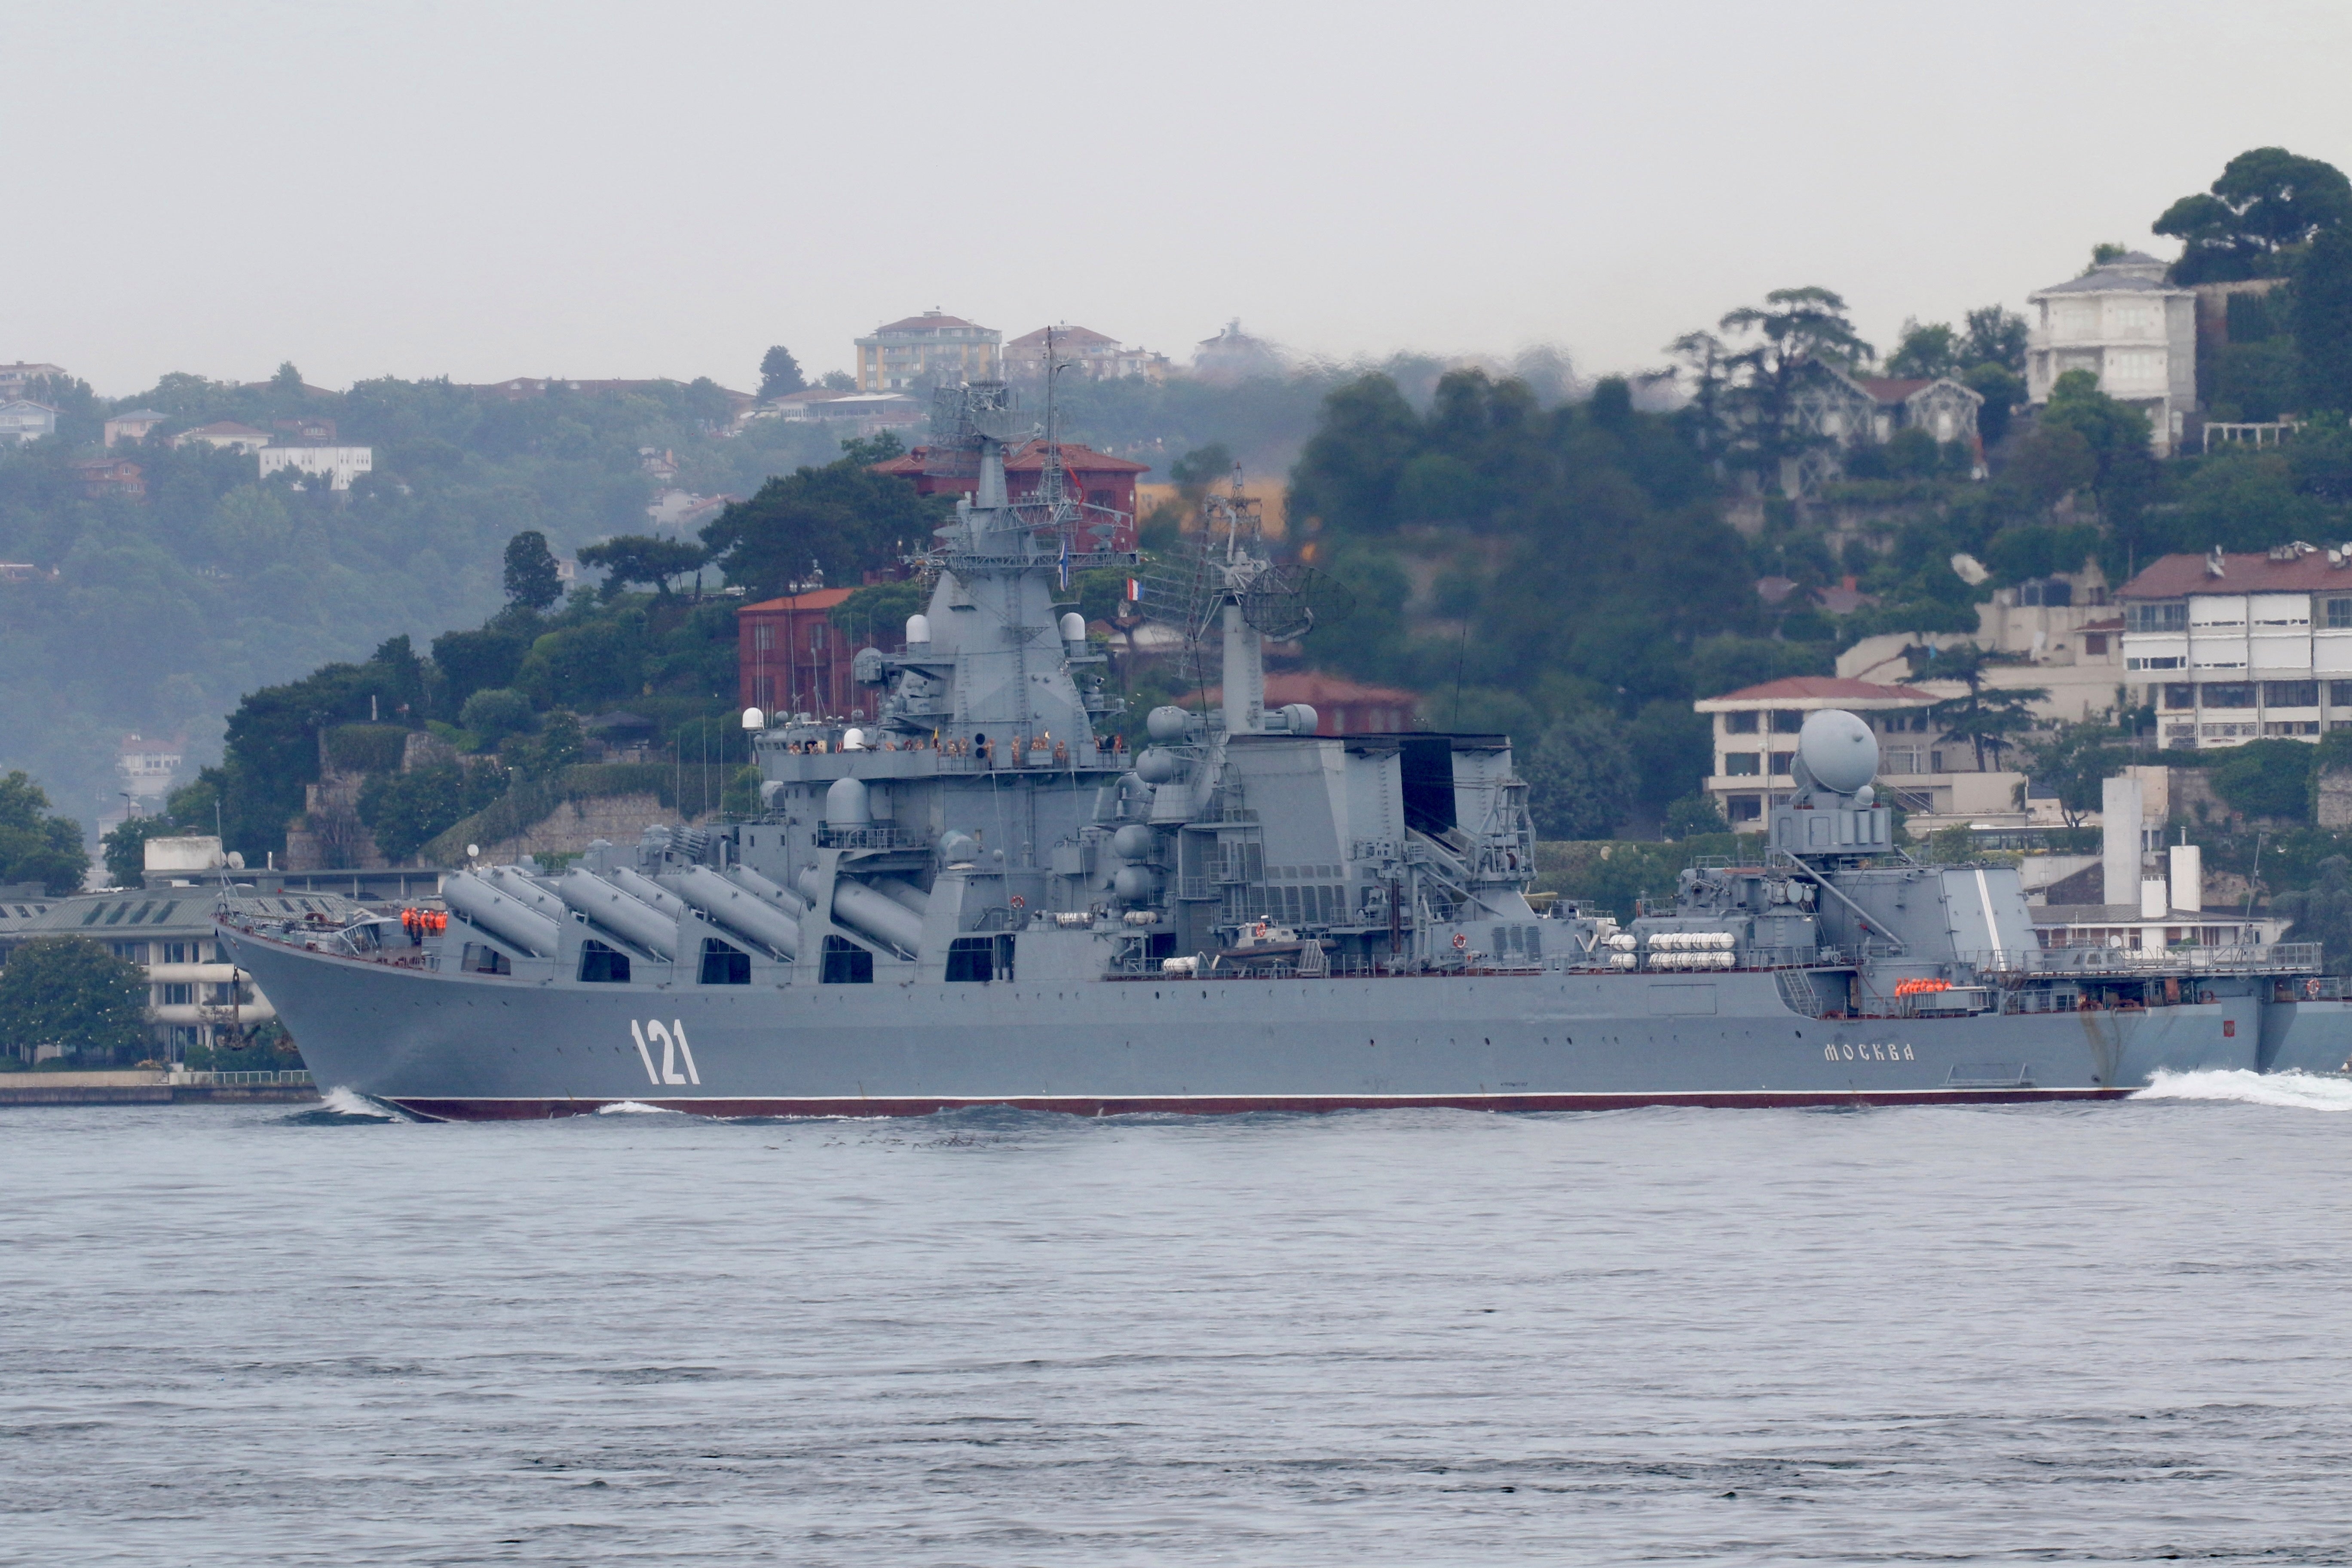 Moskva sails in the Bosphorus, on its way to the Black Sea, in July 2021